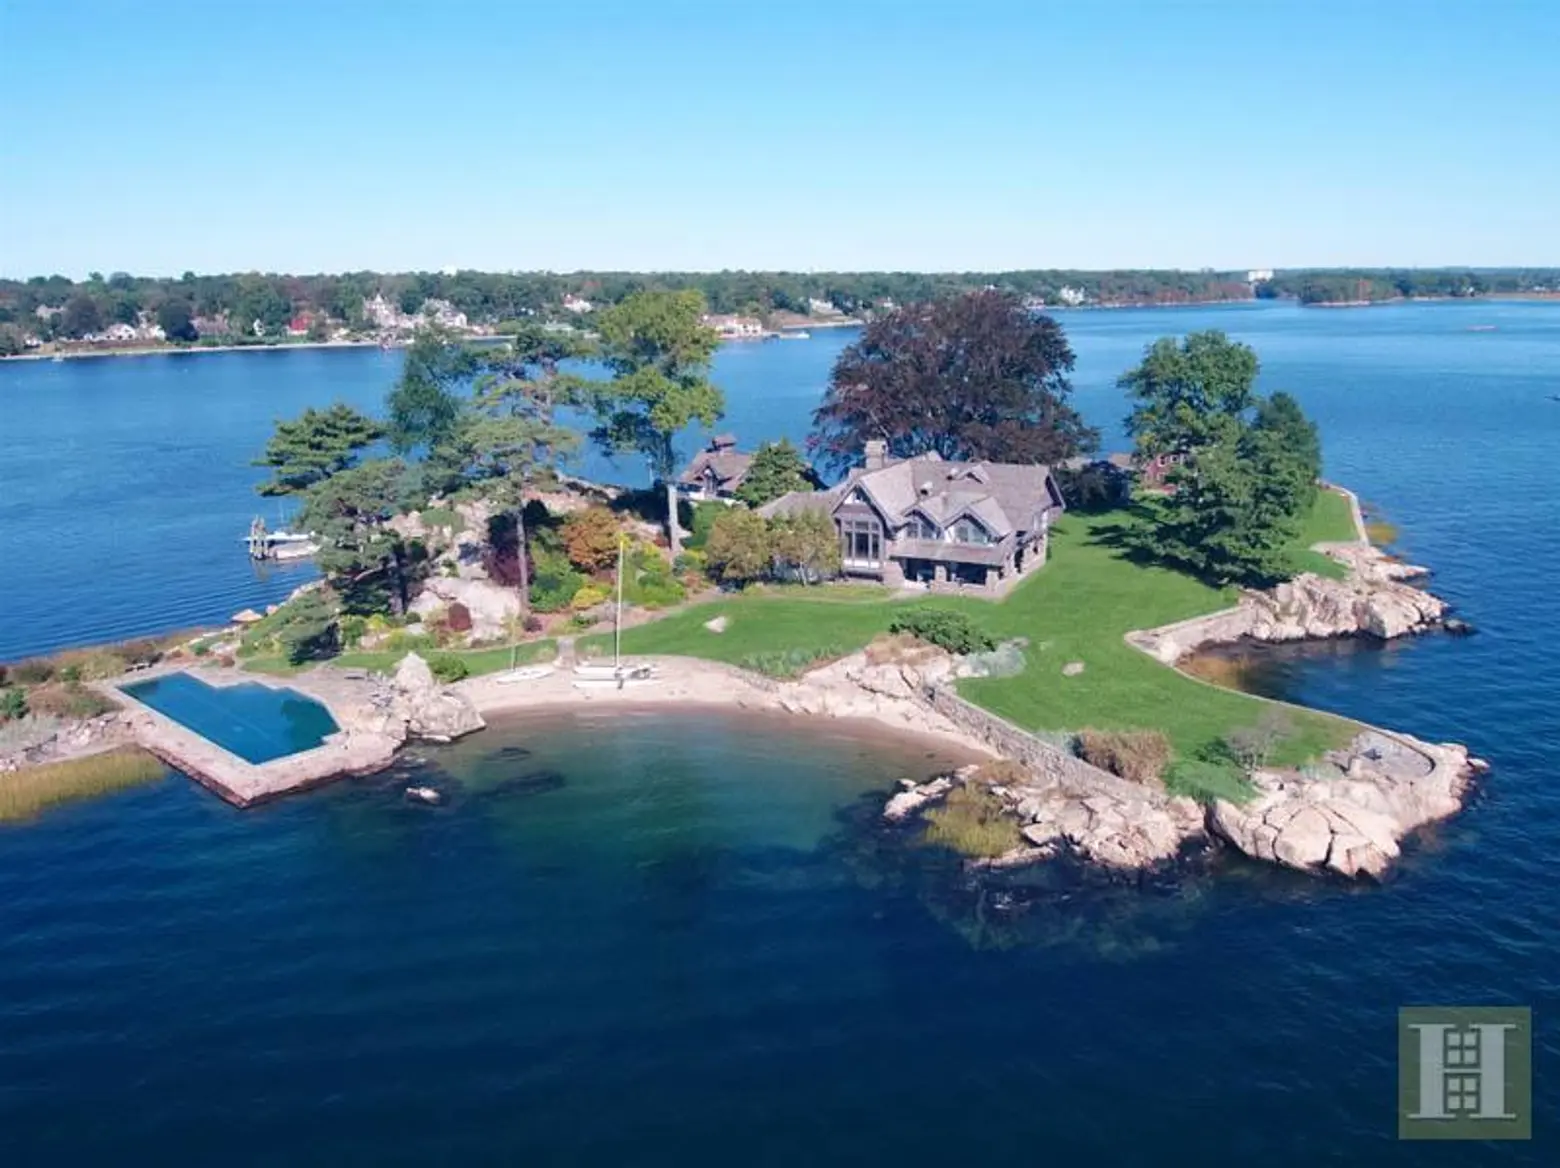 Private island mansion with celebrity history and NYC views returns for $8.7M